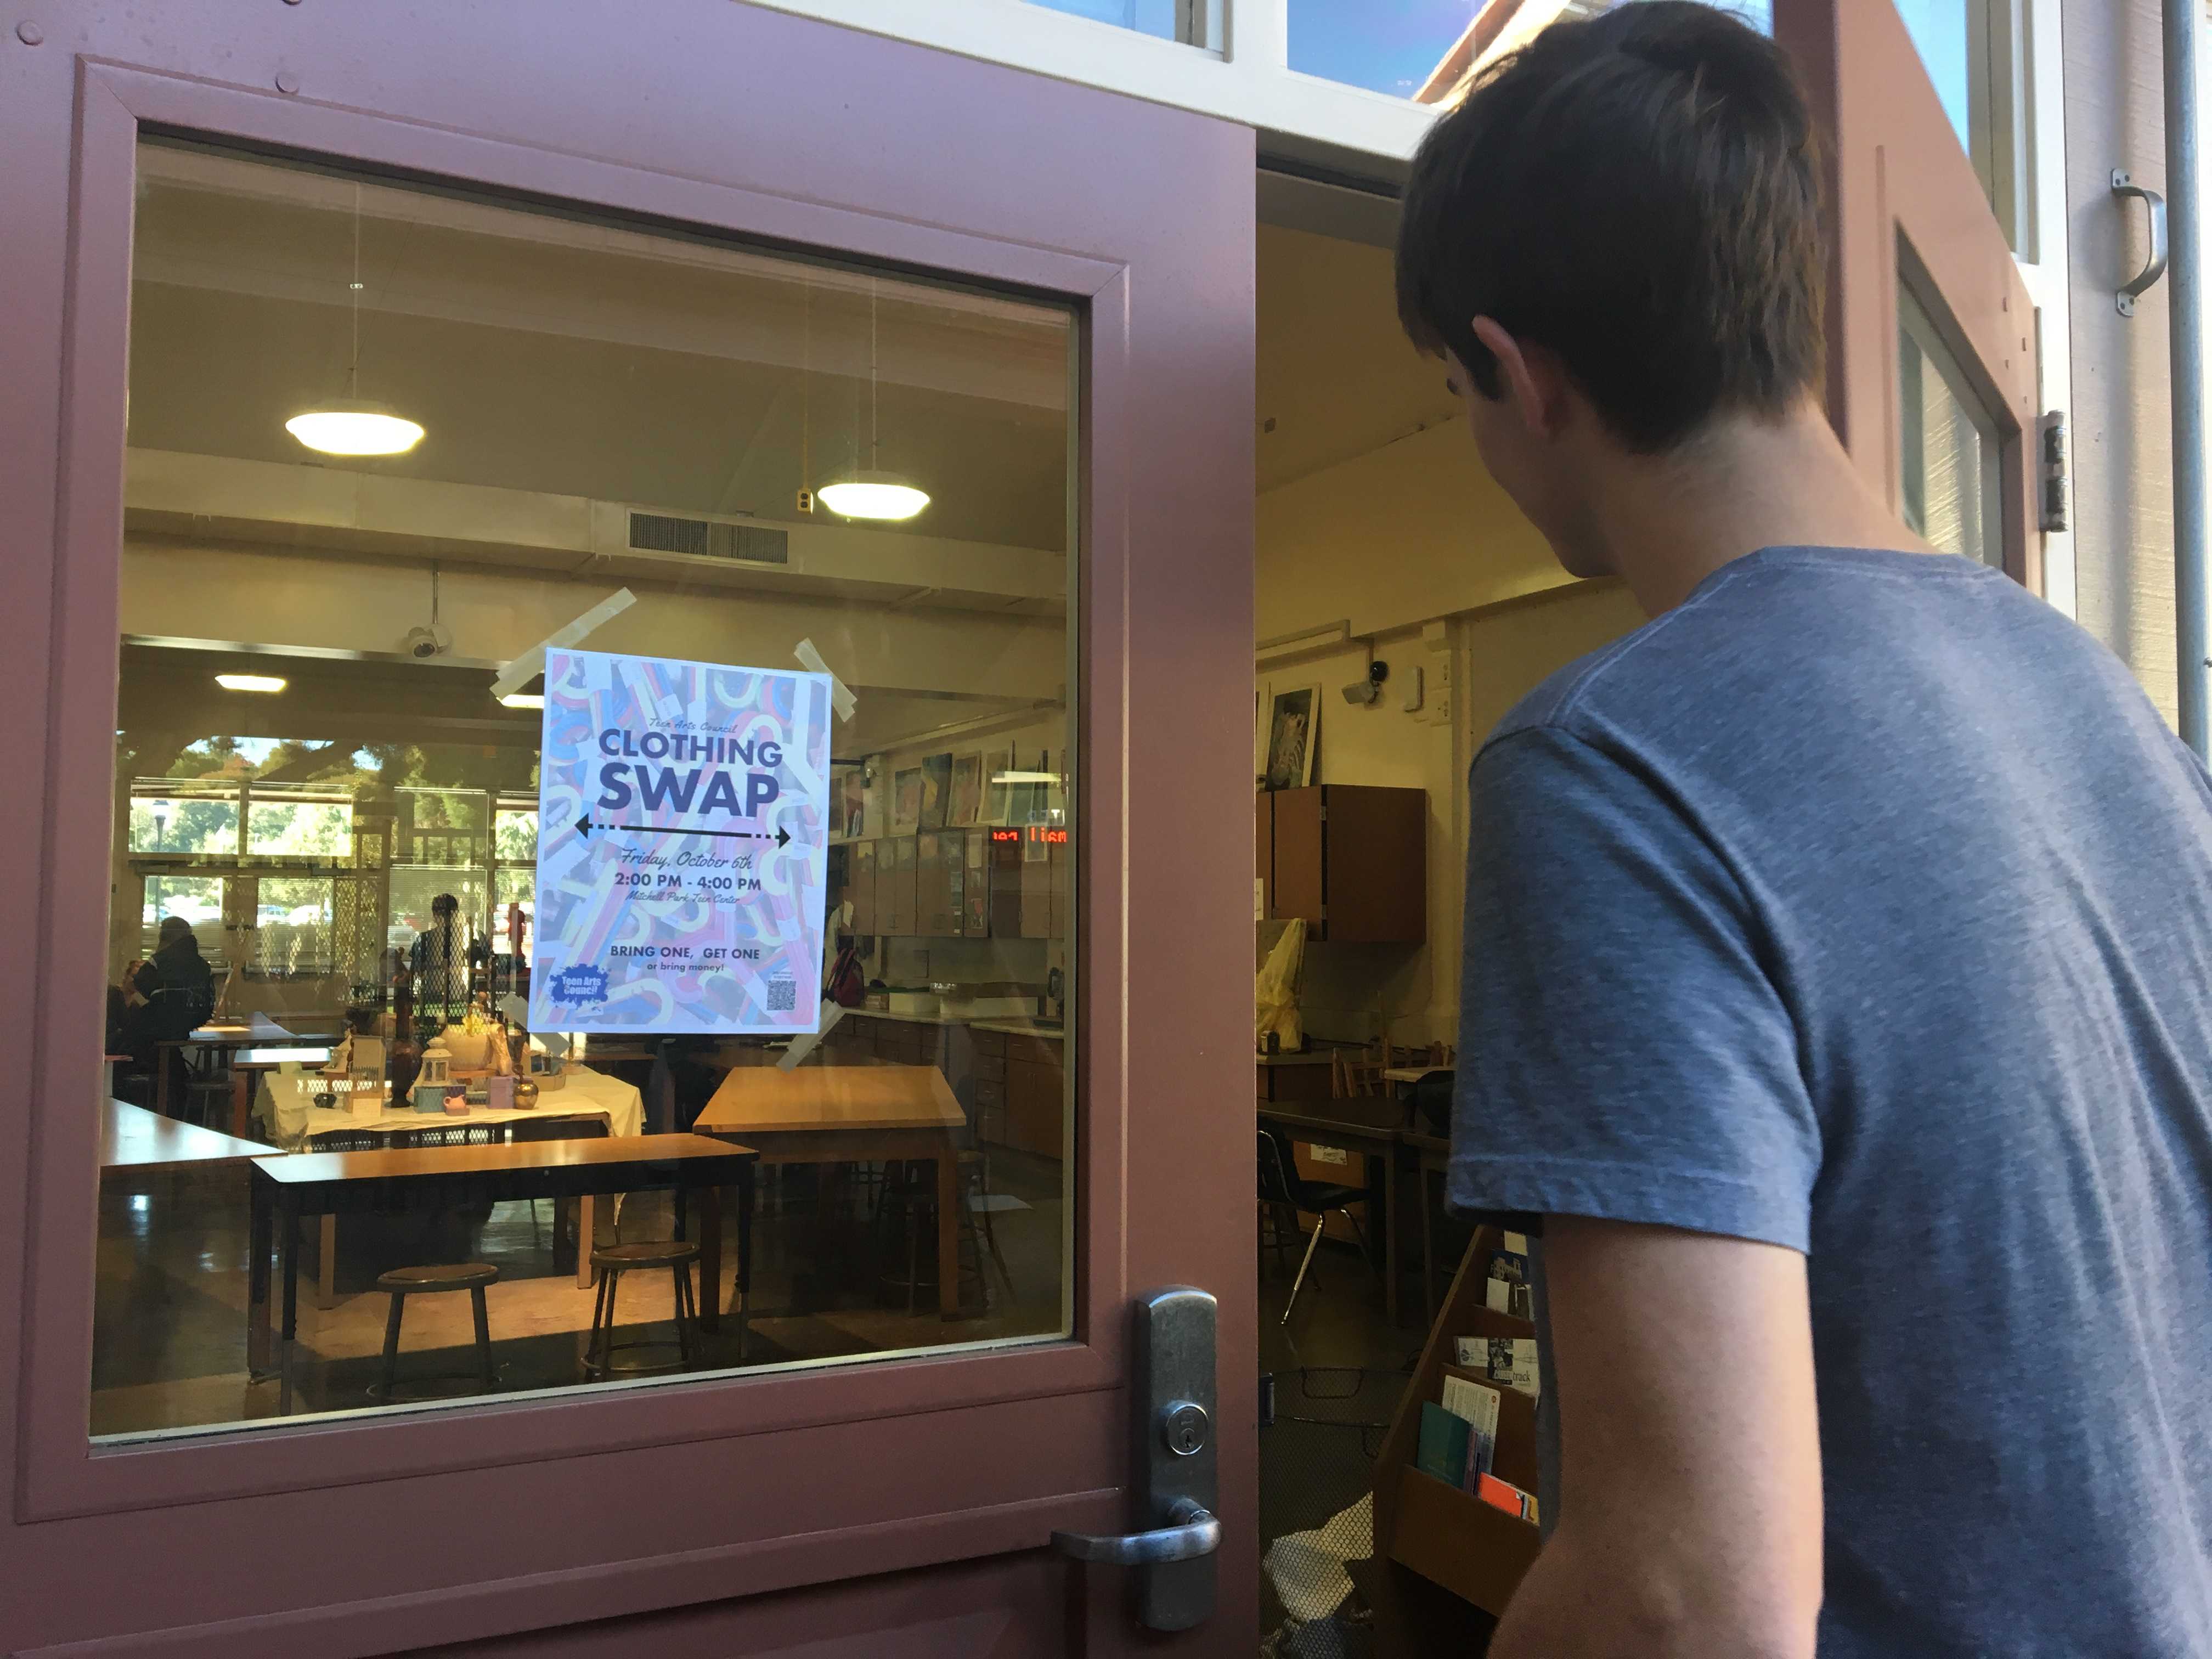 A student walks into the painting and drawing classroom, admiring the Teen Arts Council clothing swap flier. Photo: Leila Chabane